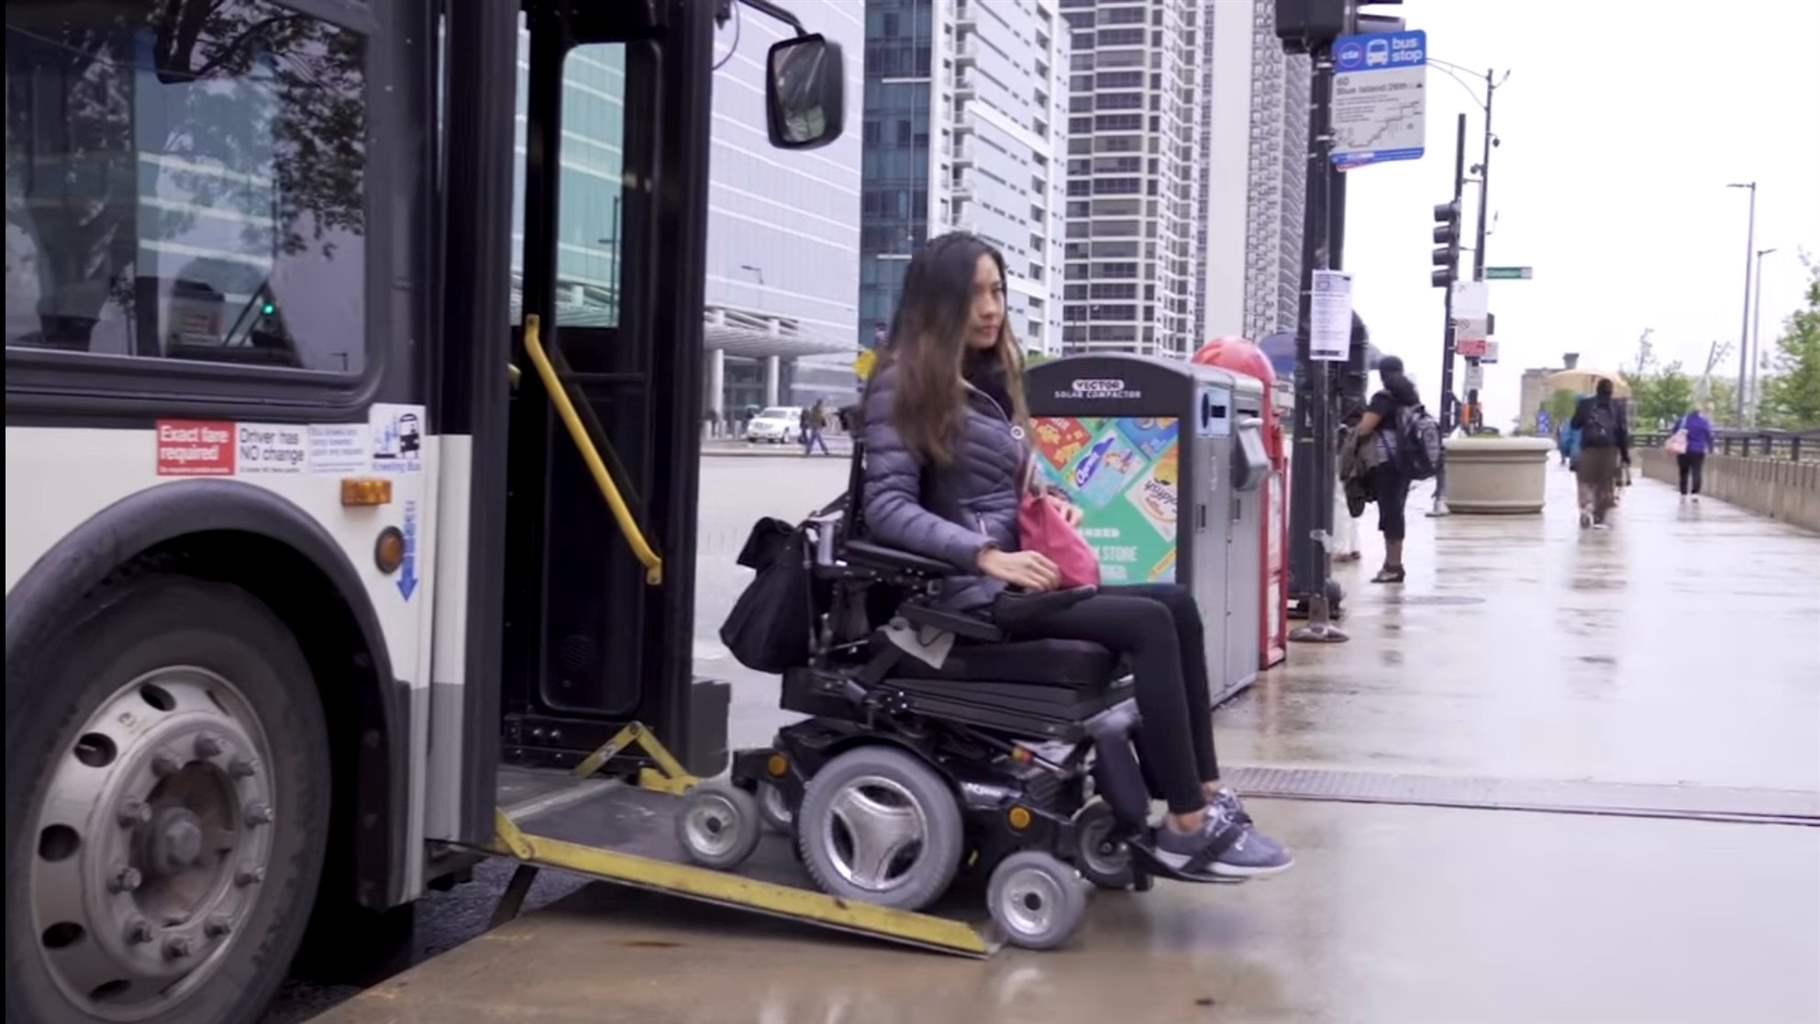 A woman in a wheelchair existing a city bus